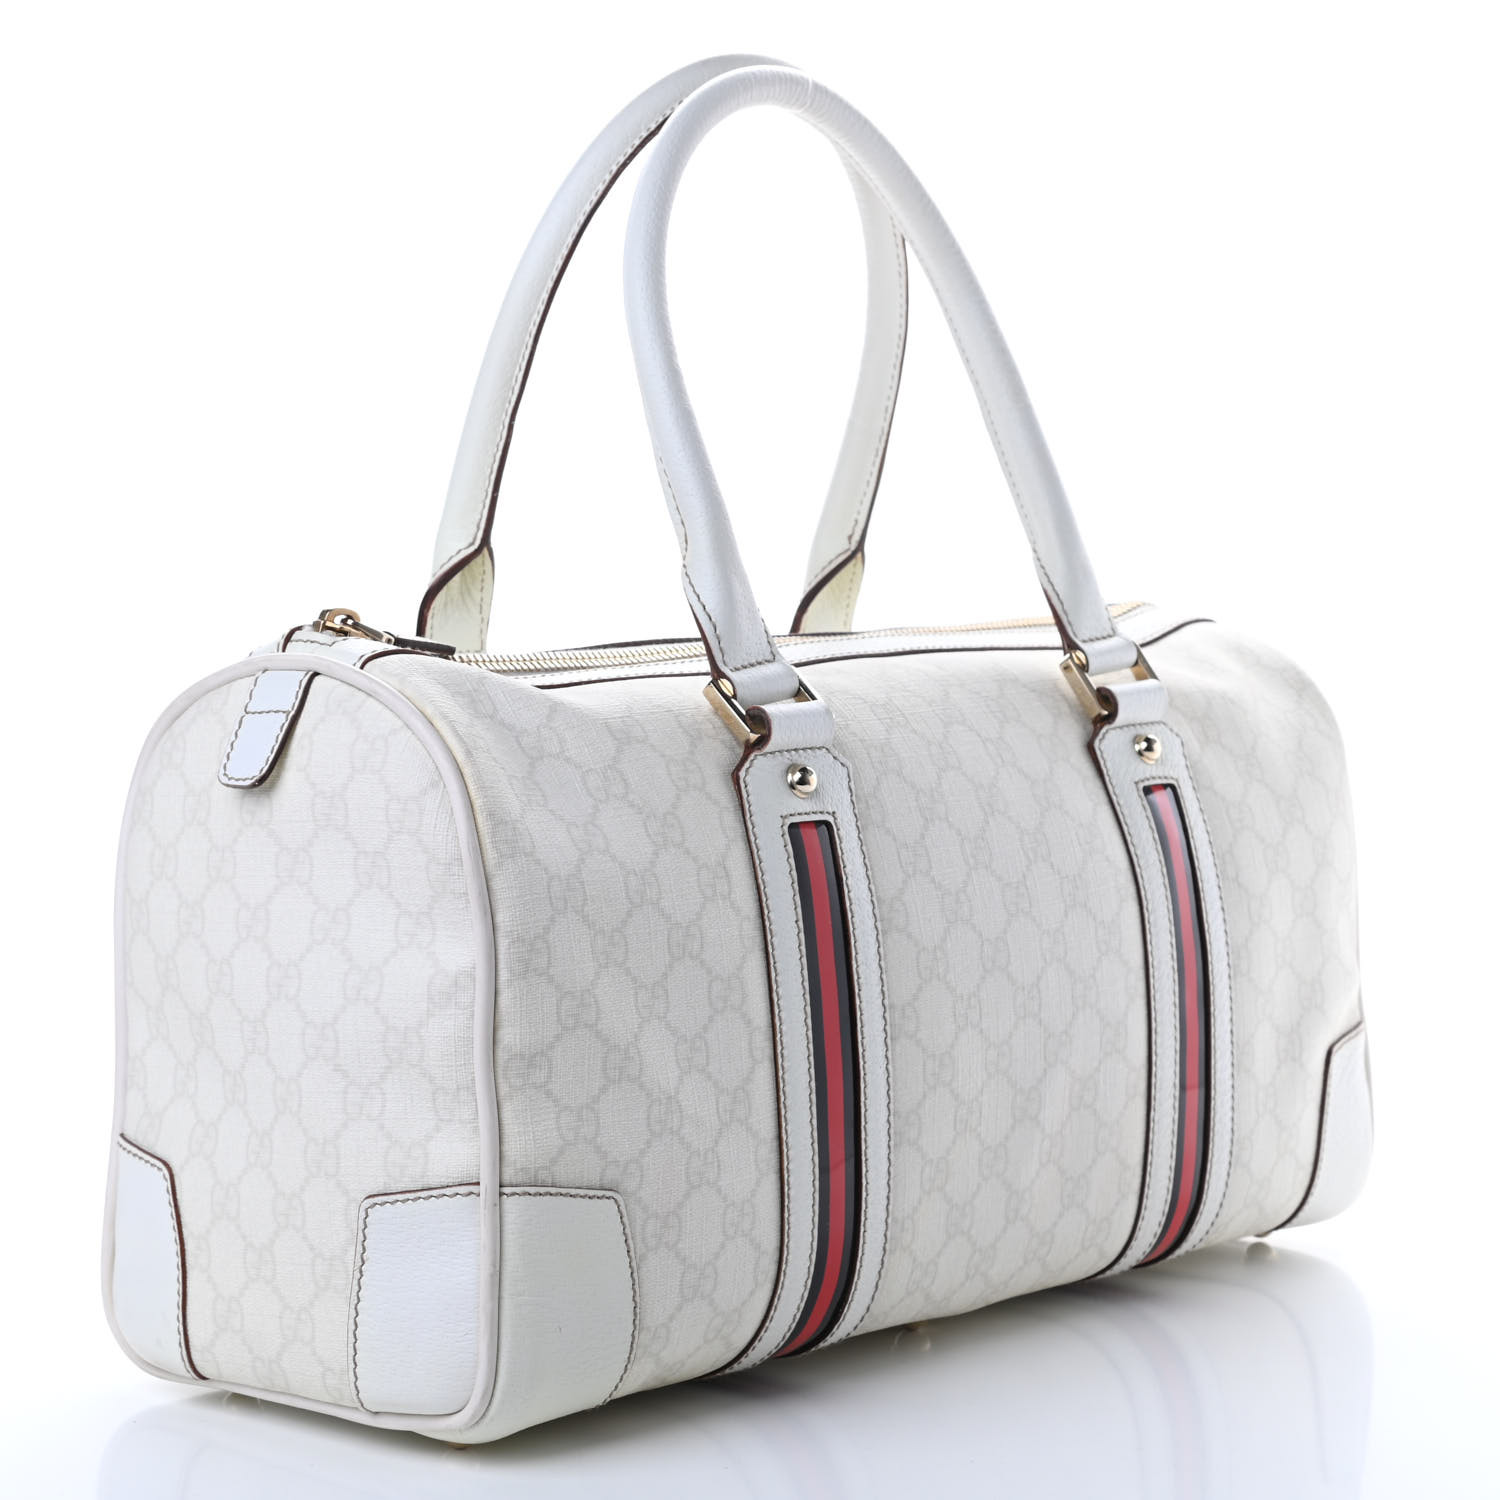 GUCCI GG Plus Monogram Large Web Carry On Duffle Bag White 723551 ...